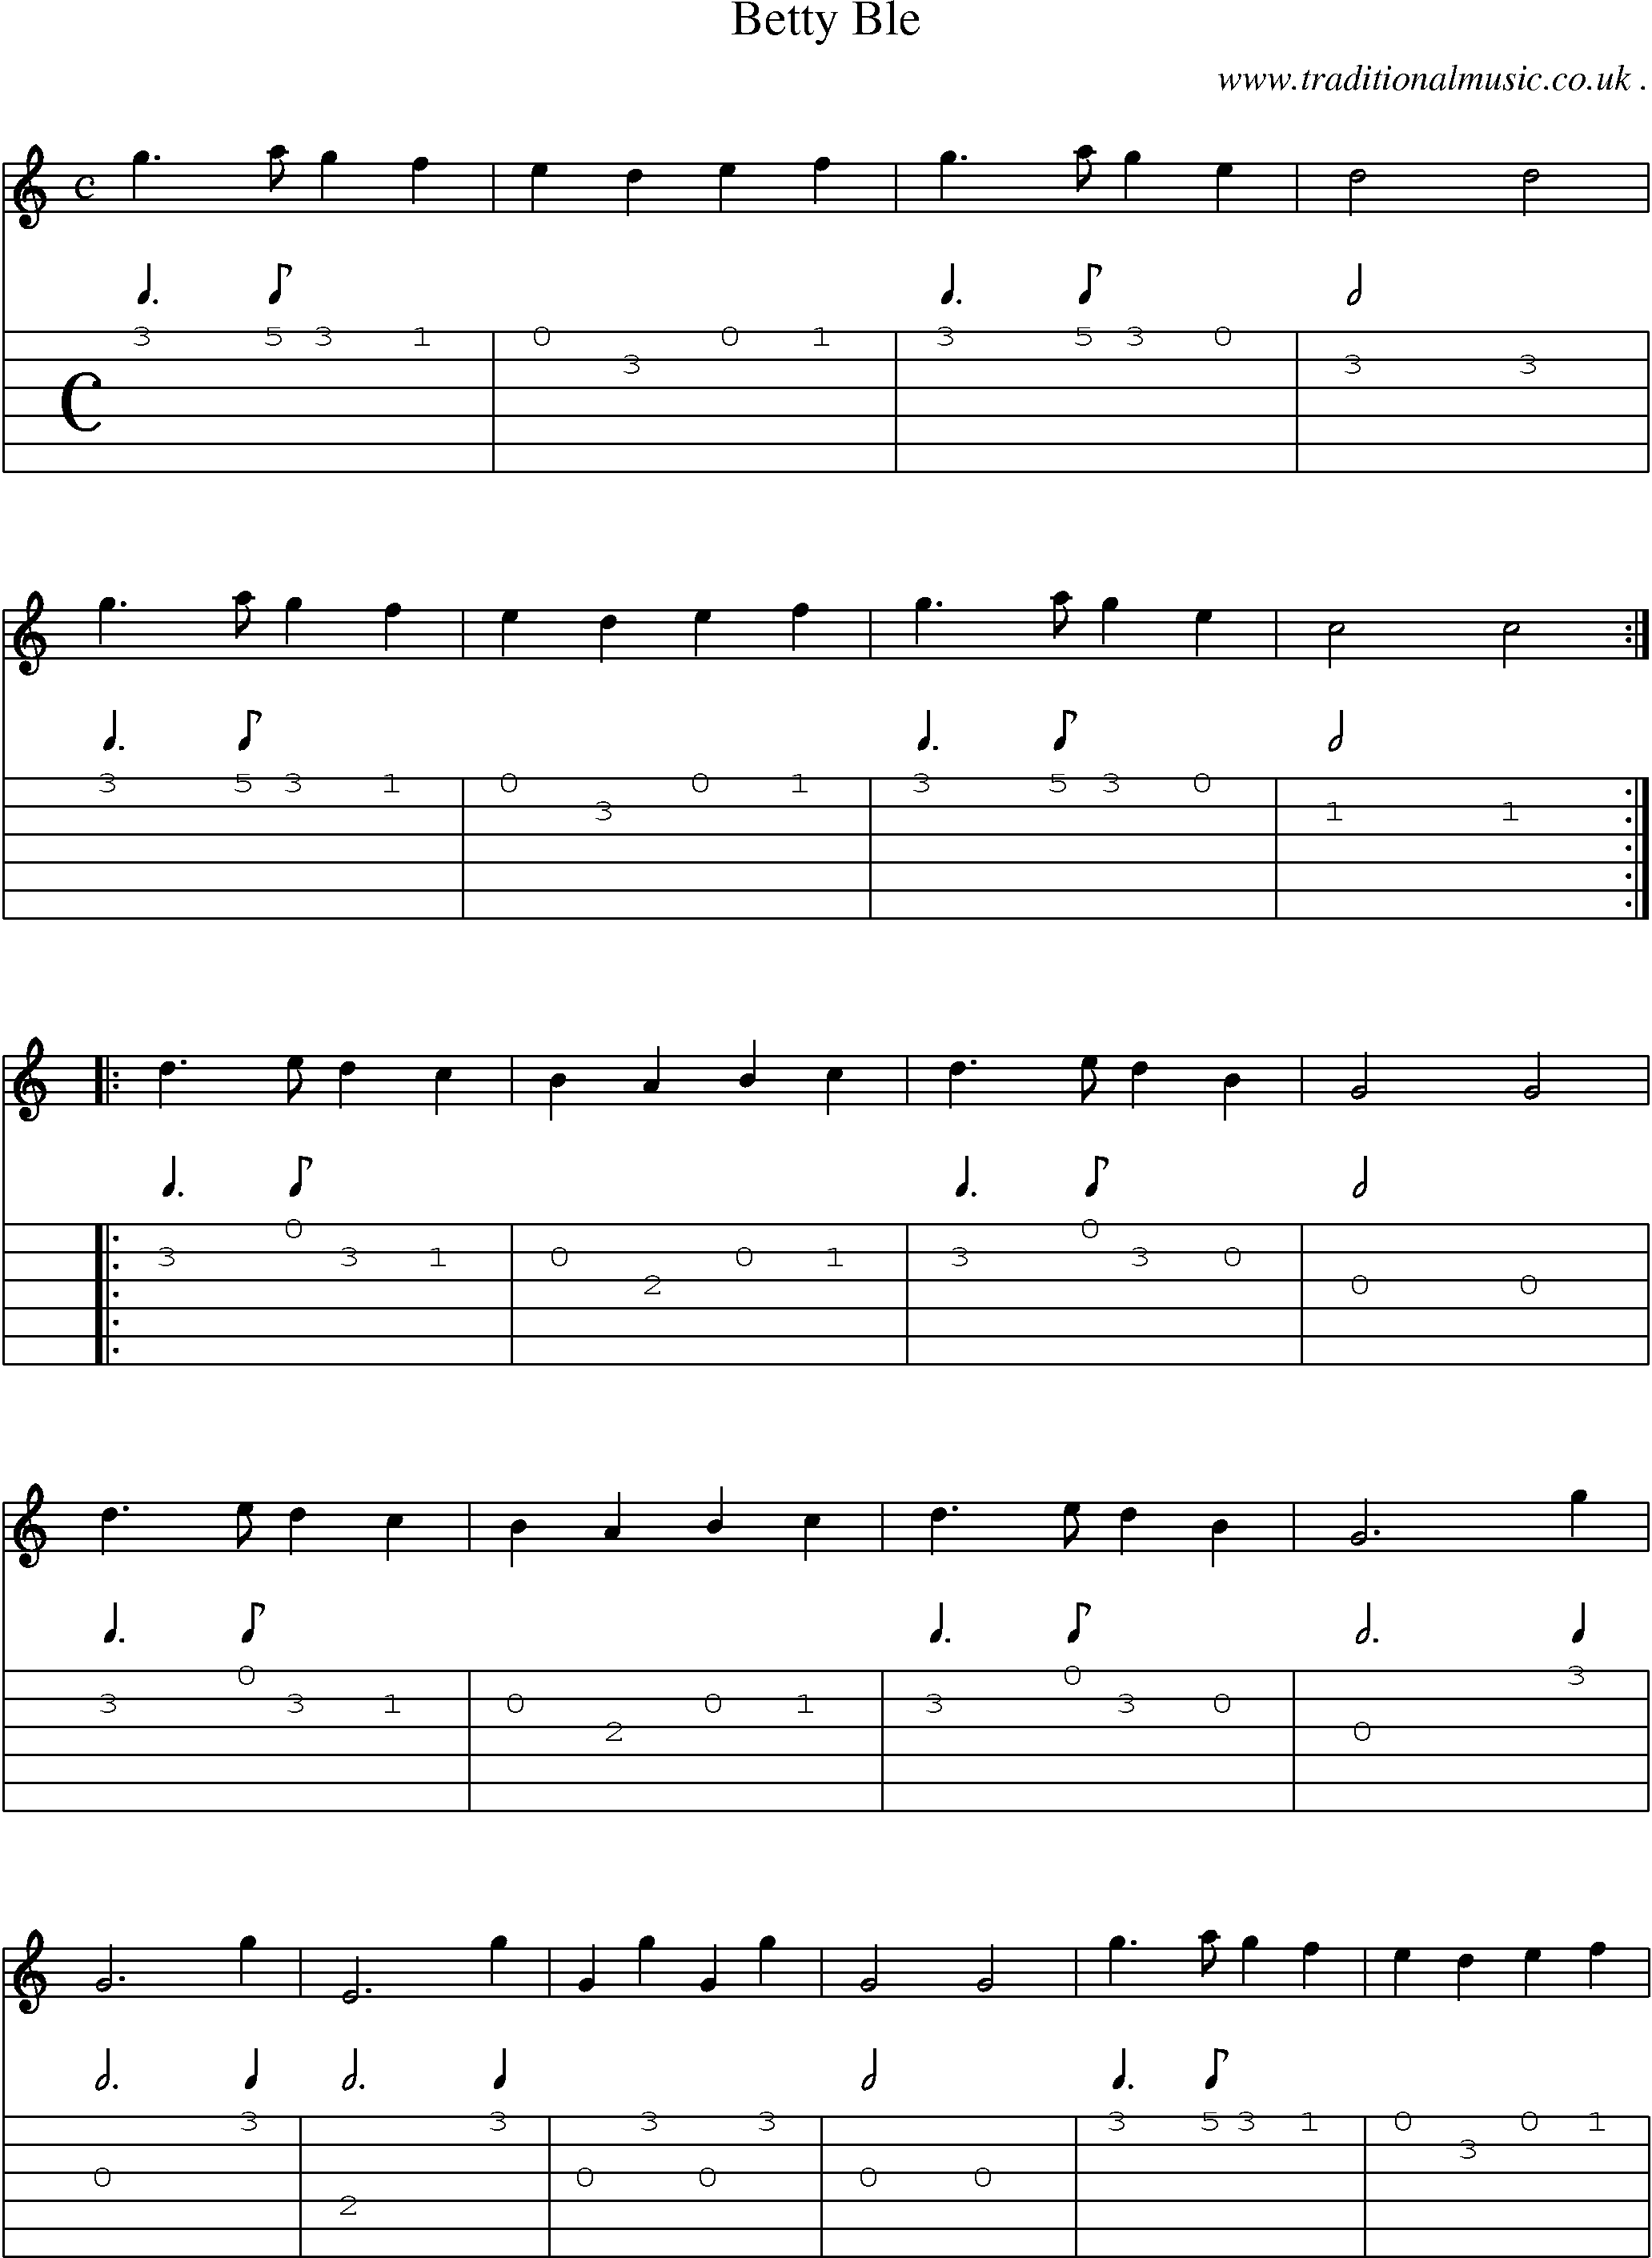 Sheet-Music and Guitar Tabs for Betty Ble